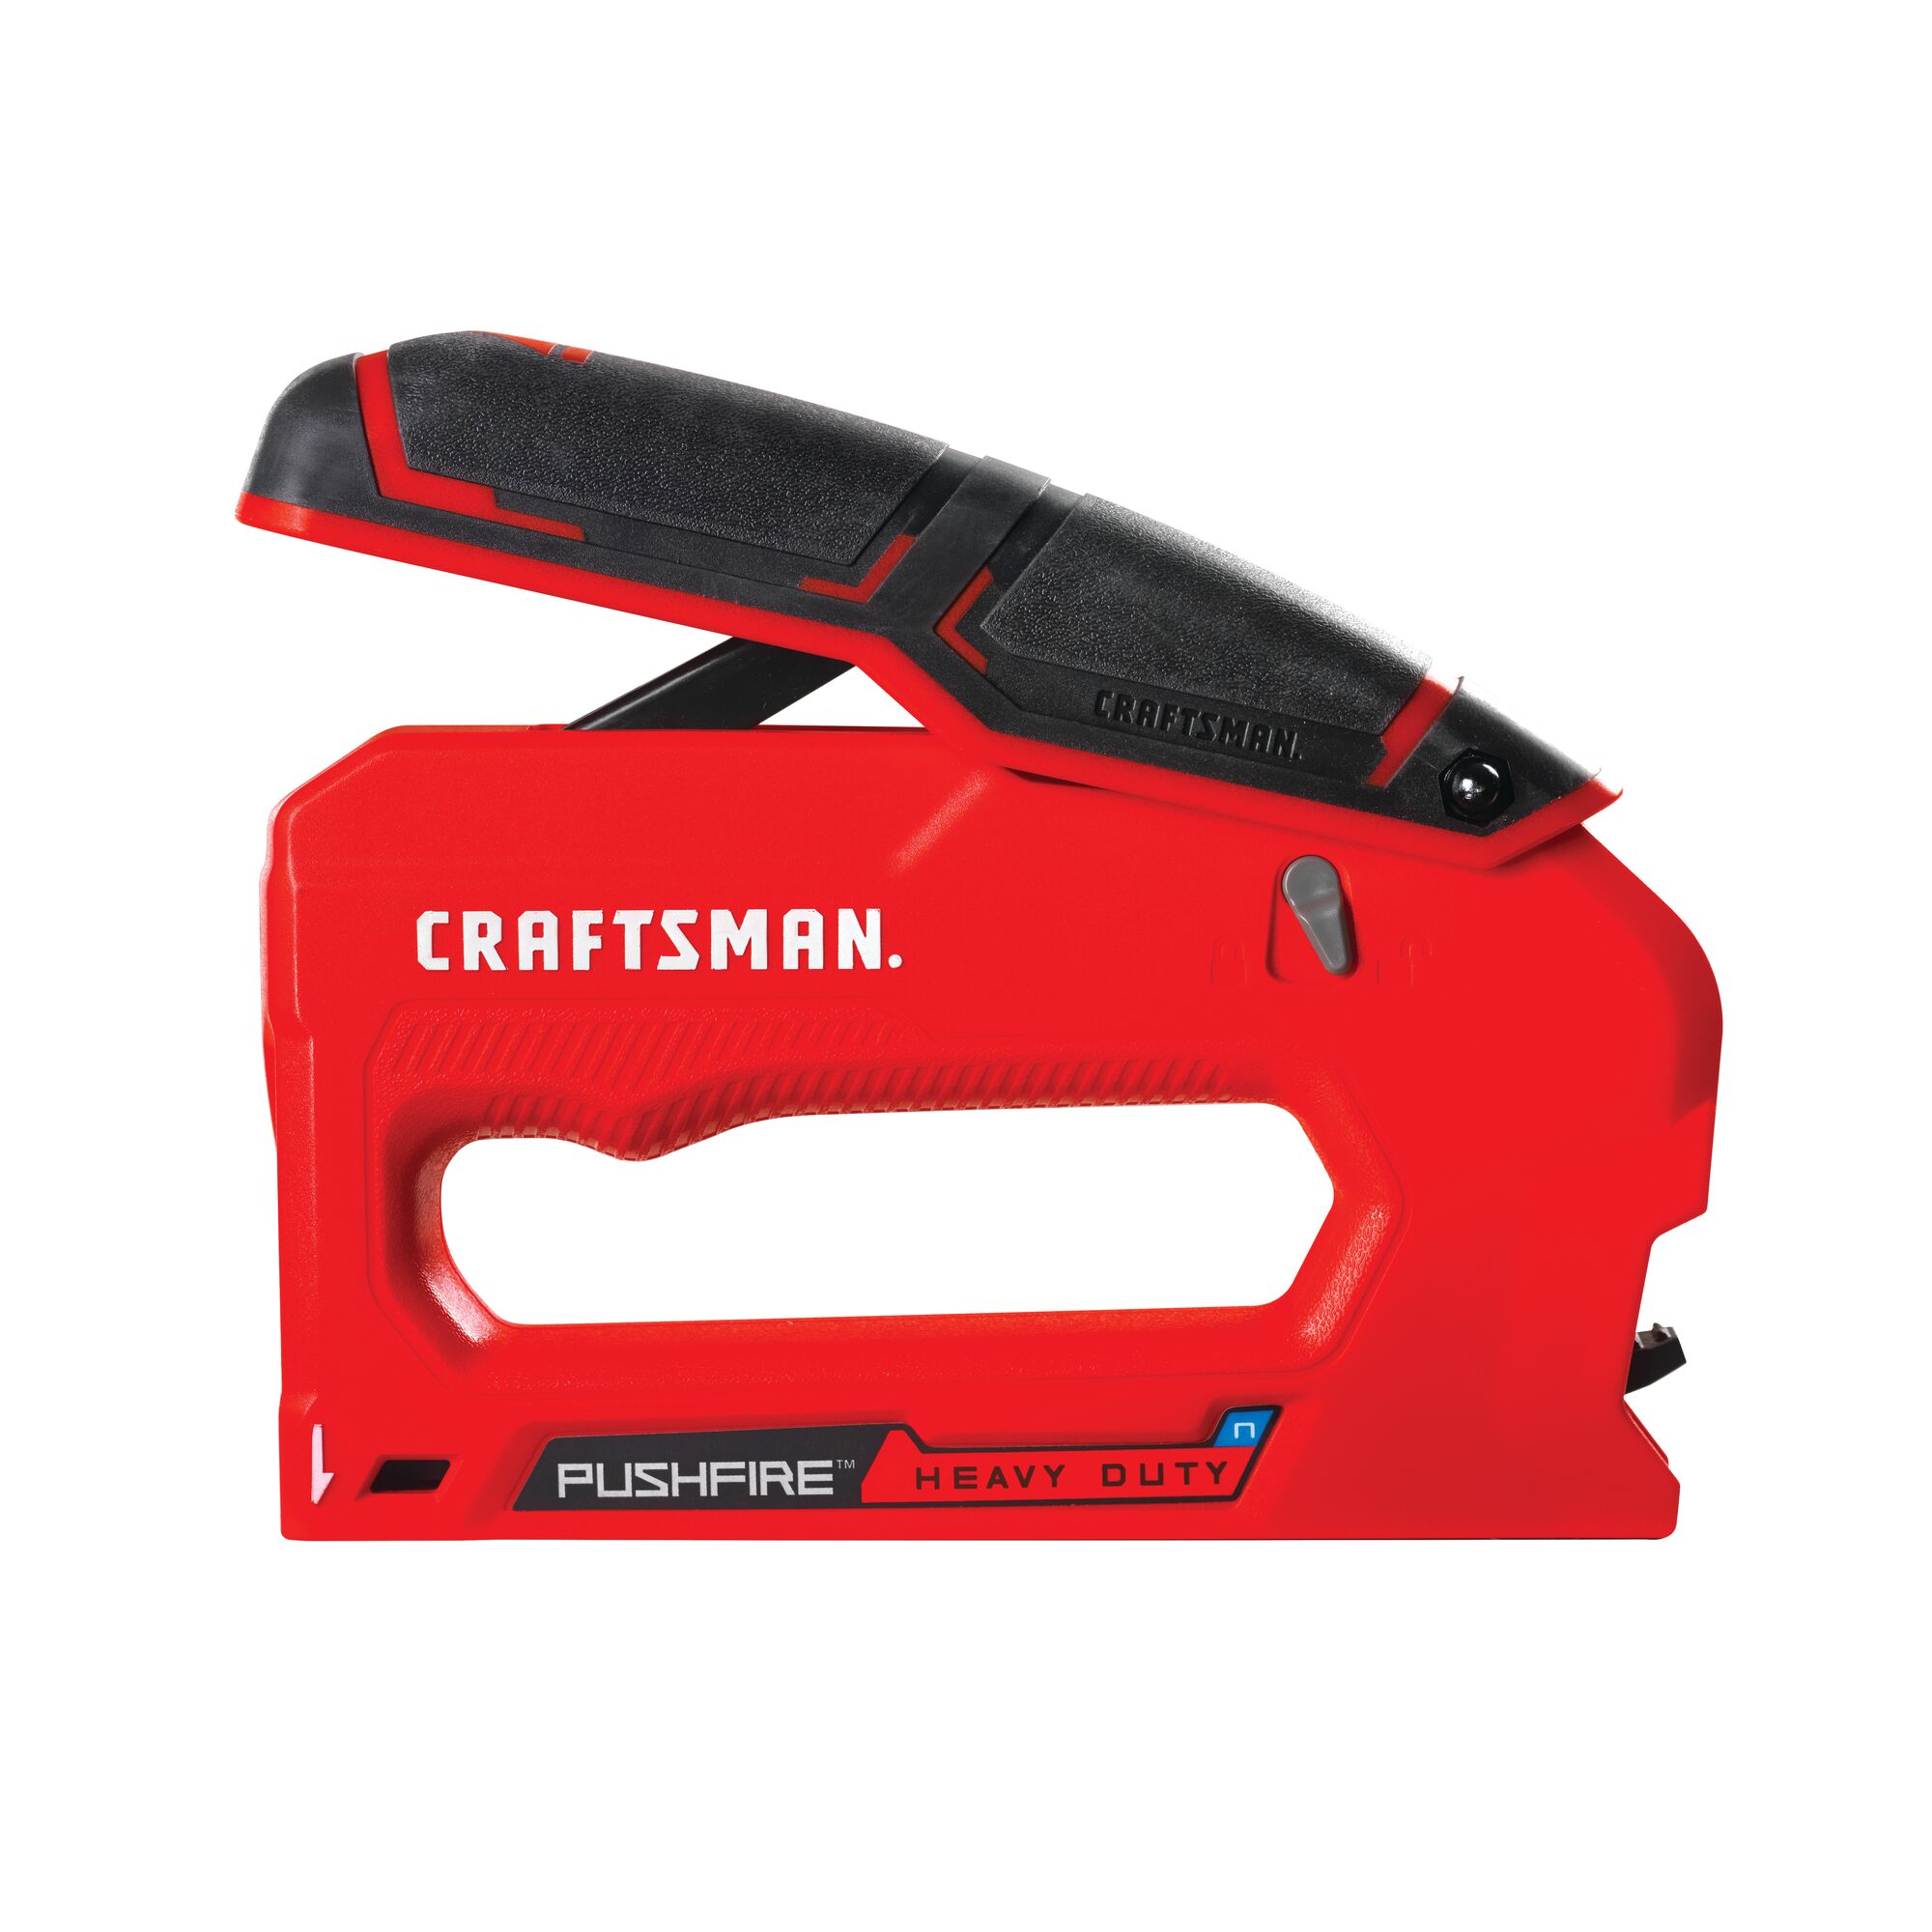 View of CRAFTSMAN Staplers on white background